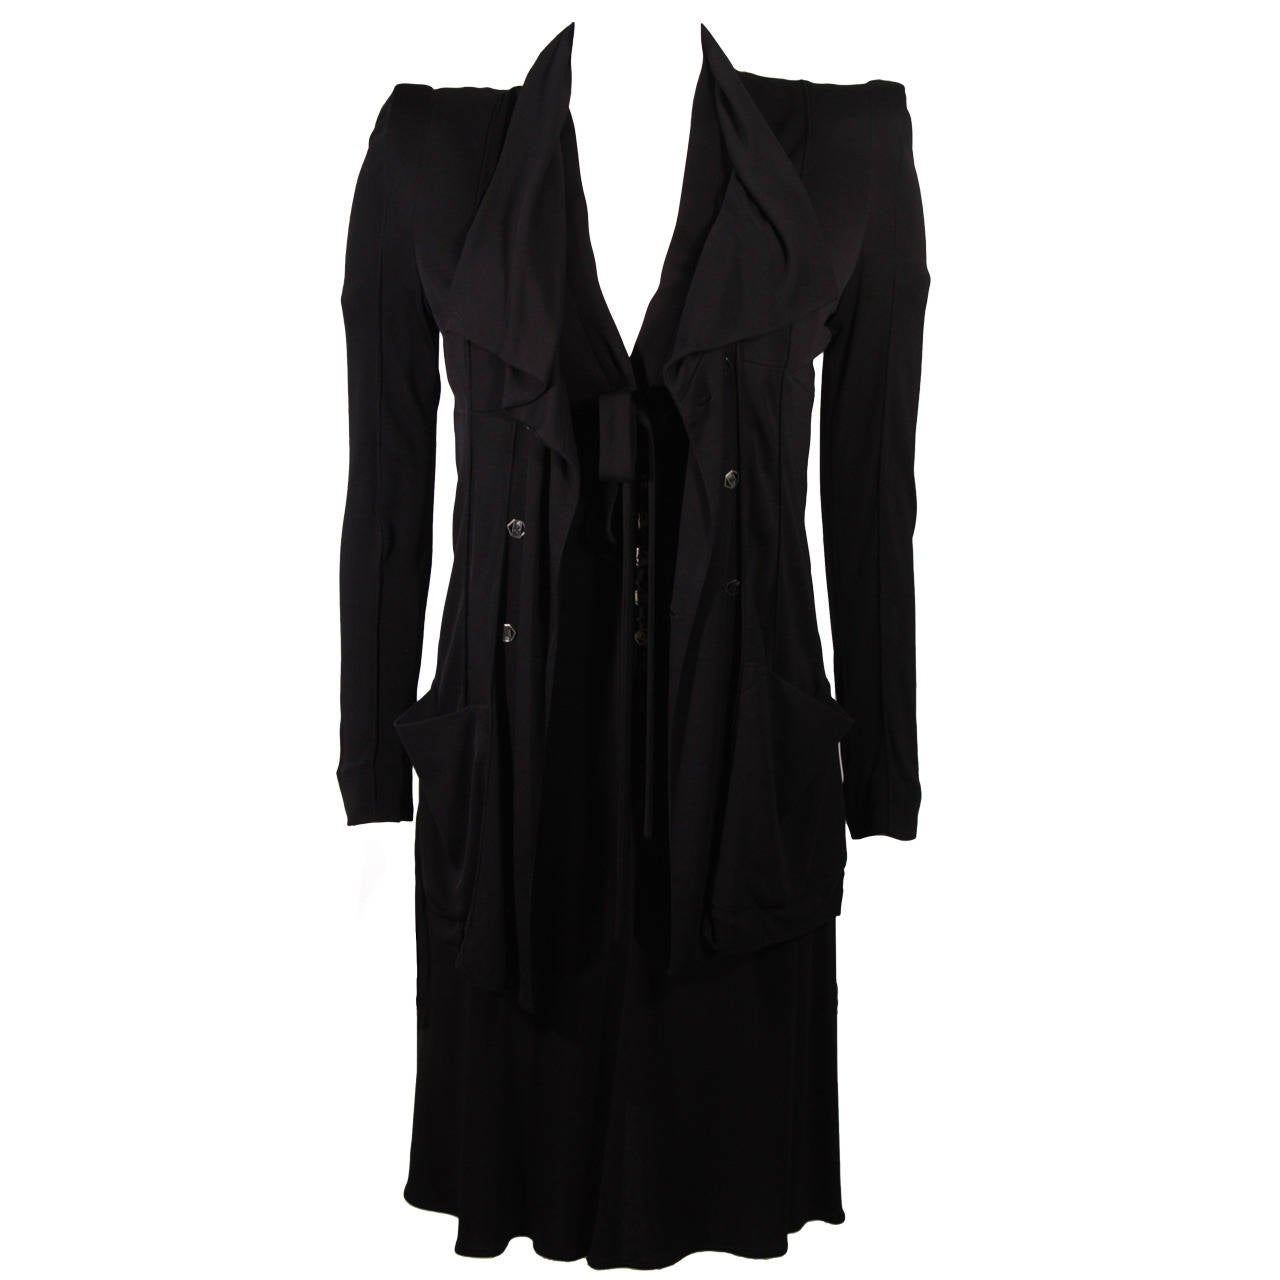 Lagerfield Black Jersey Dress and Jacket Ensemble Size 36 For Sale